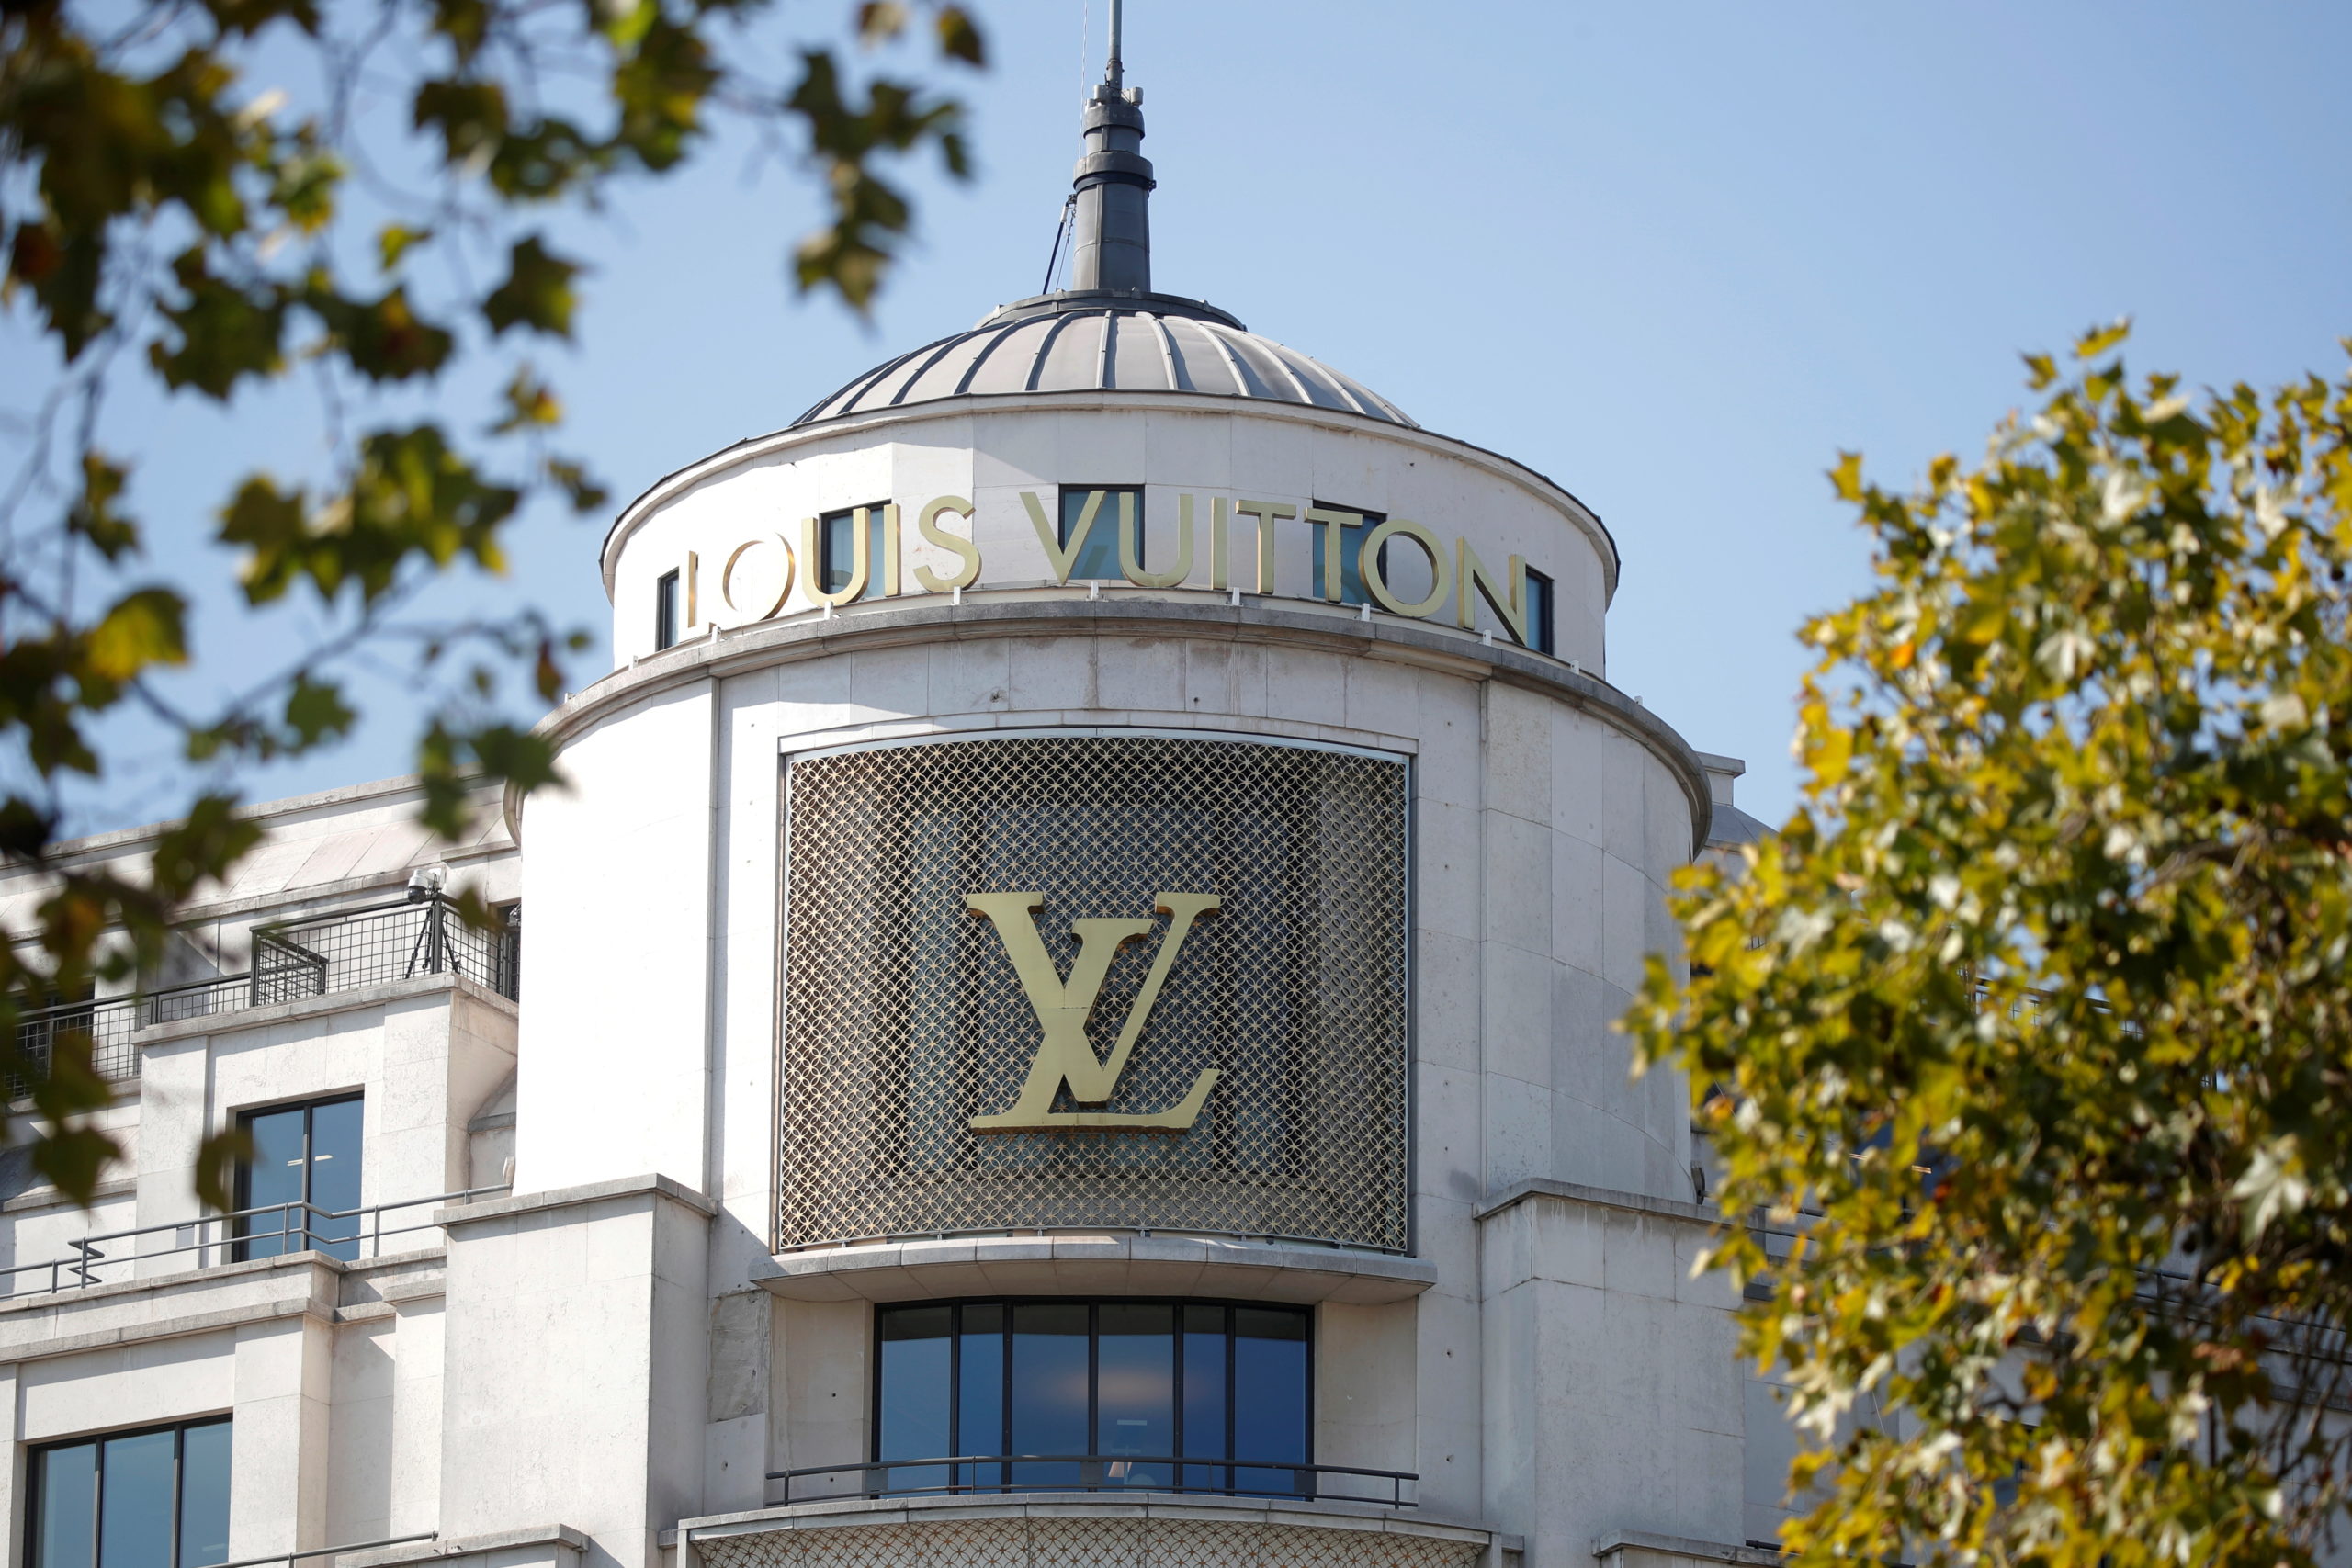 Louis Vuitton shares hit record high after strong sales figures